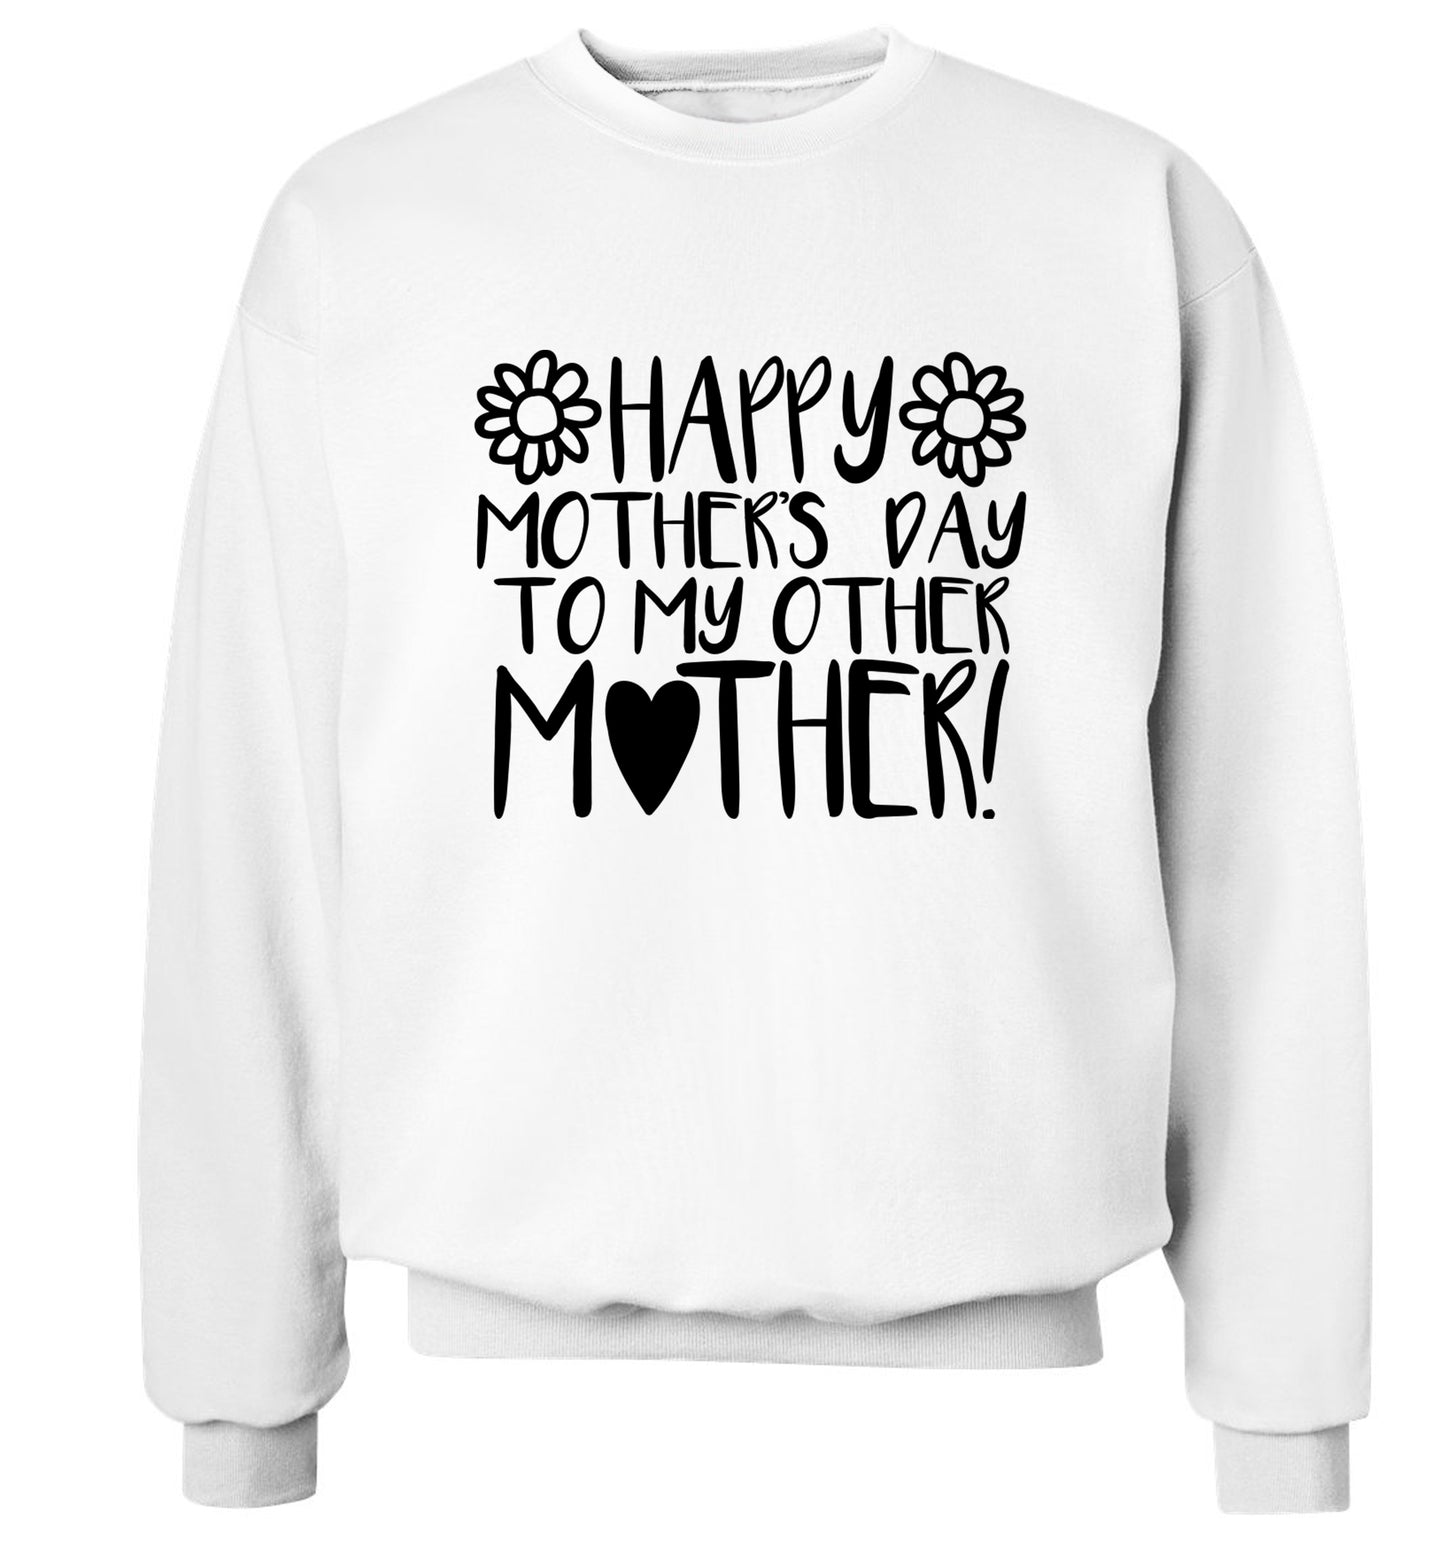 Happy mother's day to my other mother Adult's unisex white Sweater 2XL